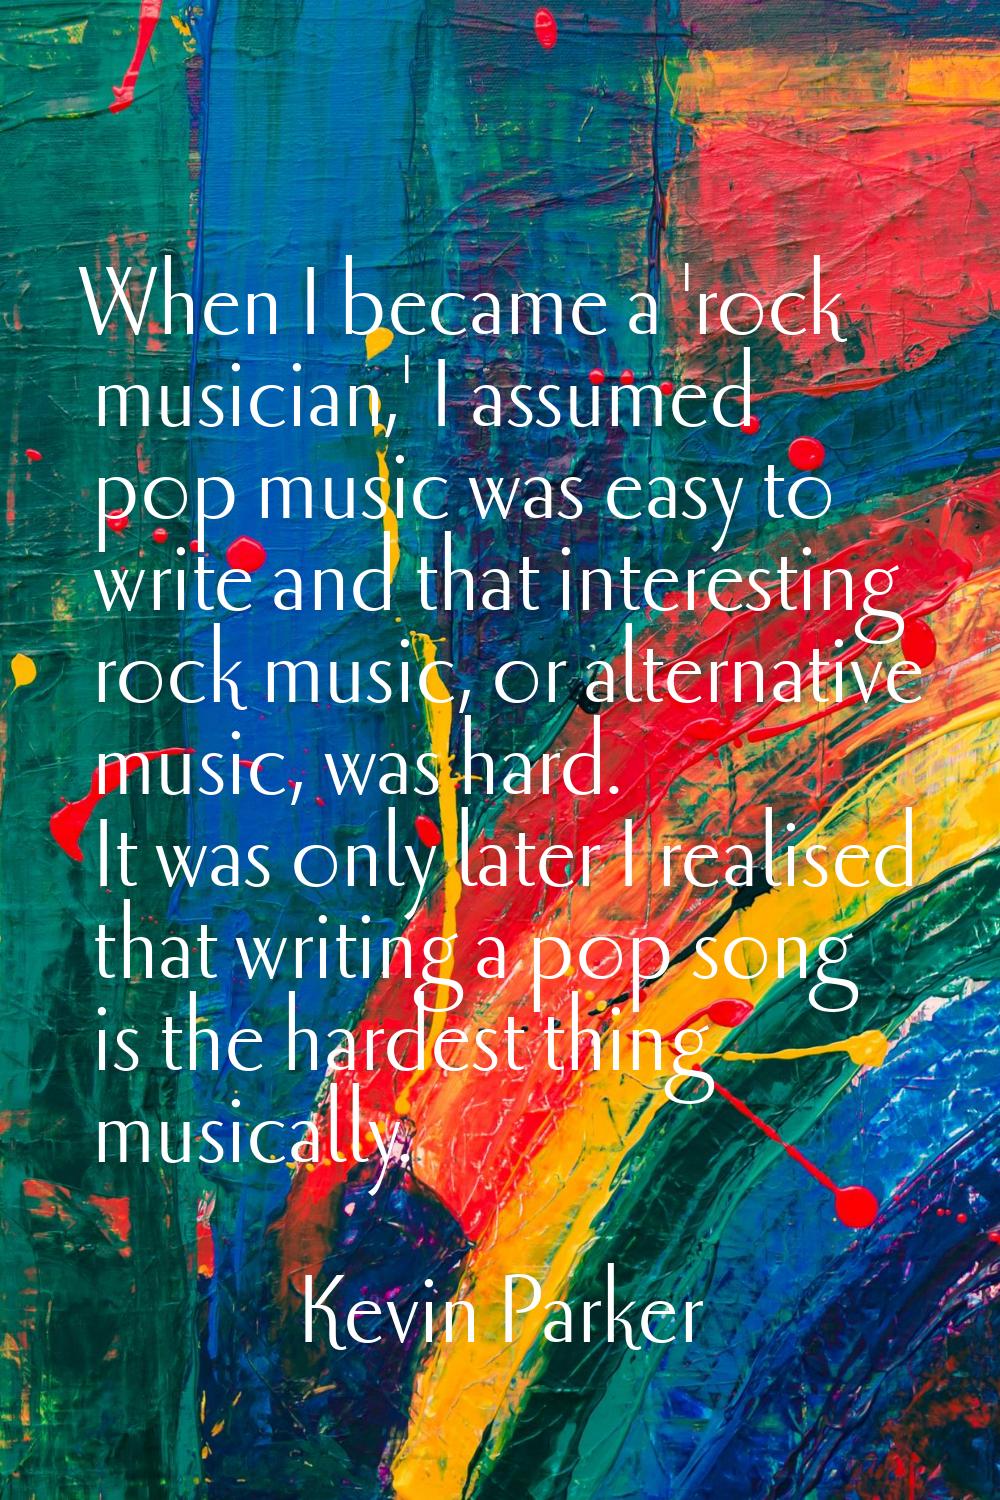 When I became a 'rock musician,' I assumed pop music was easy to write and that interesting rock mu